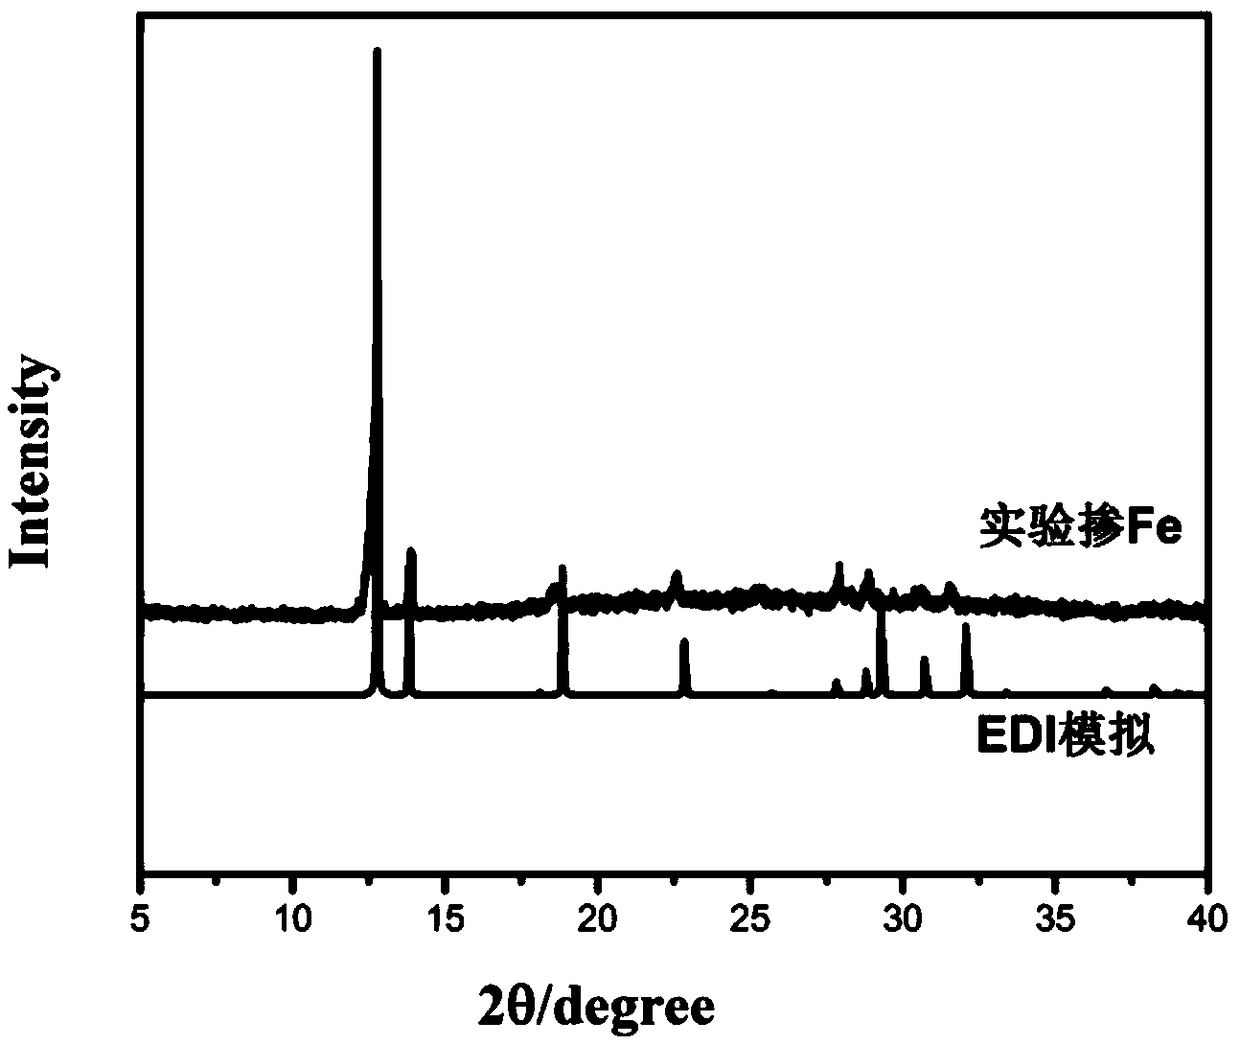 Metal-doped EDI-type zinc phosphate molecular sieve and synthesis method thereof